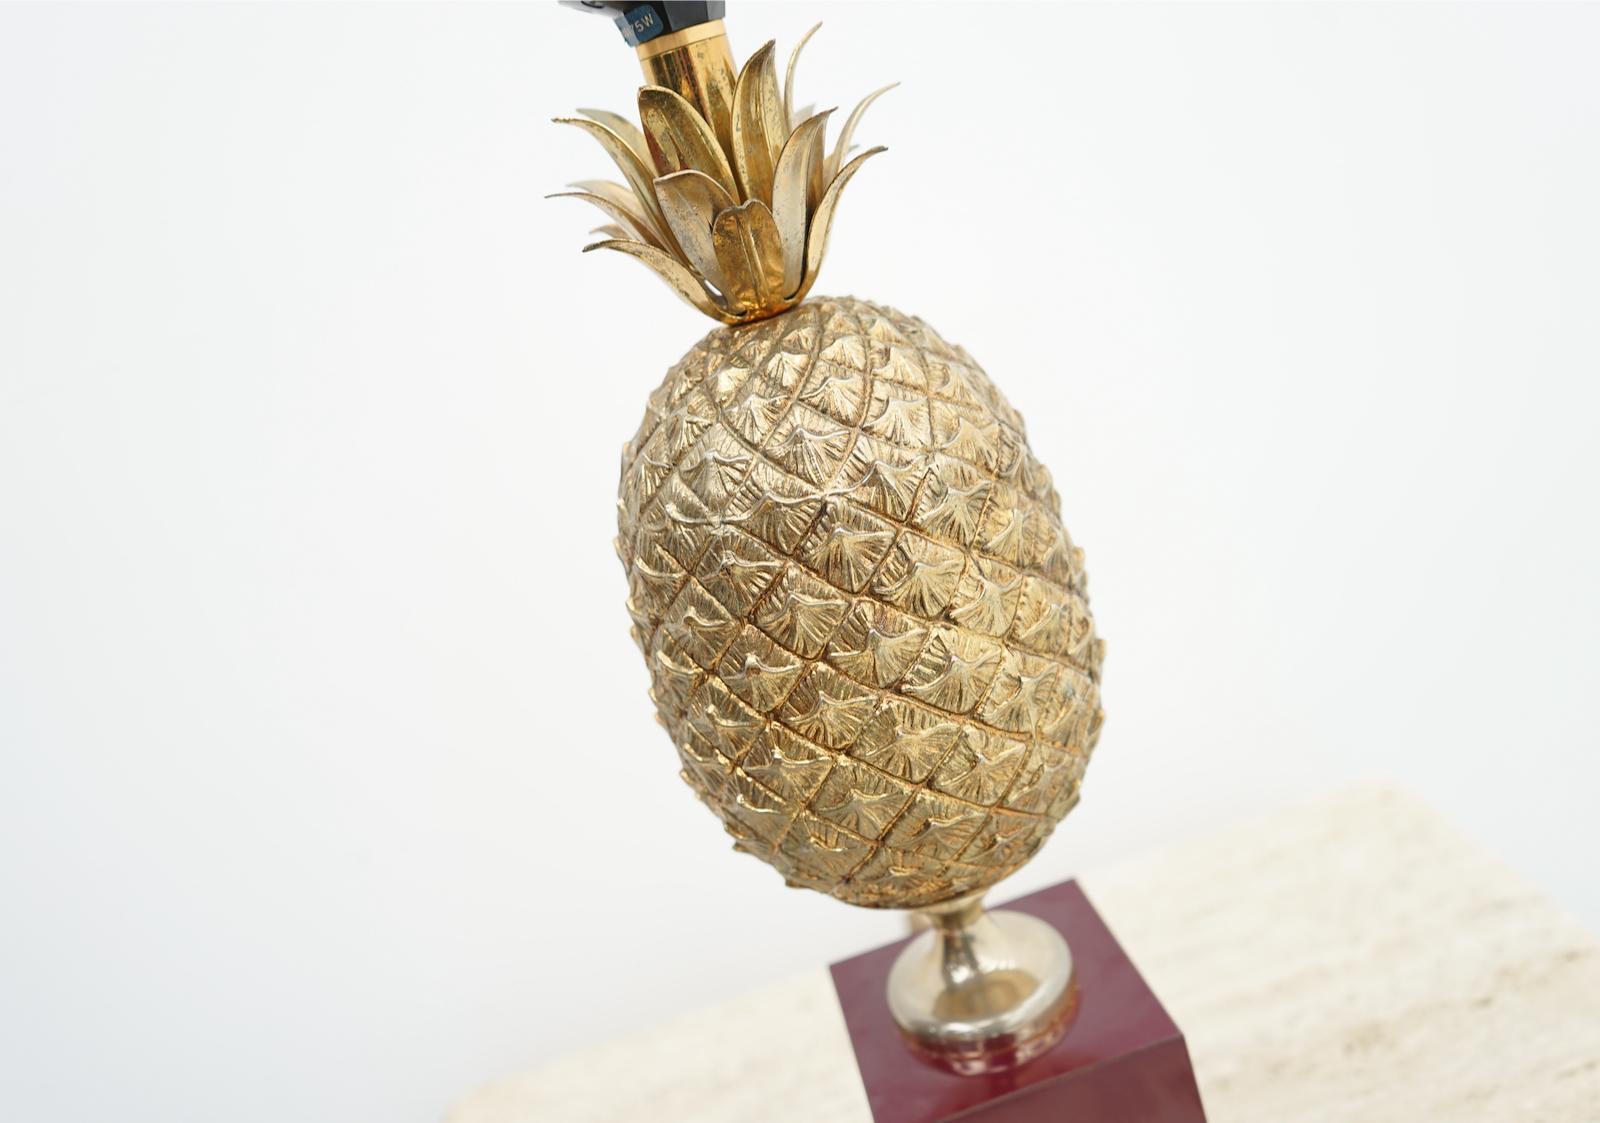 Brass pineapple table lamp with original shade on a on a Bordeaux red lacquered base.
Good to very good condition.
Dimensions: Height: 33.46 in. (85 cm) diameter: 17.32 in. (44 cm).